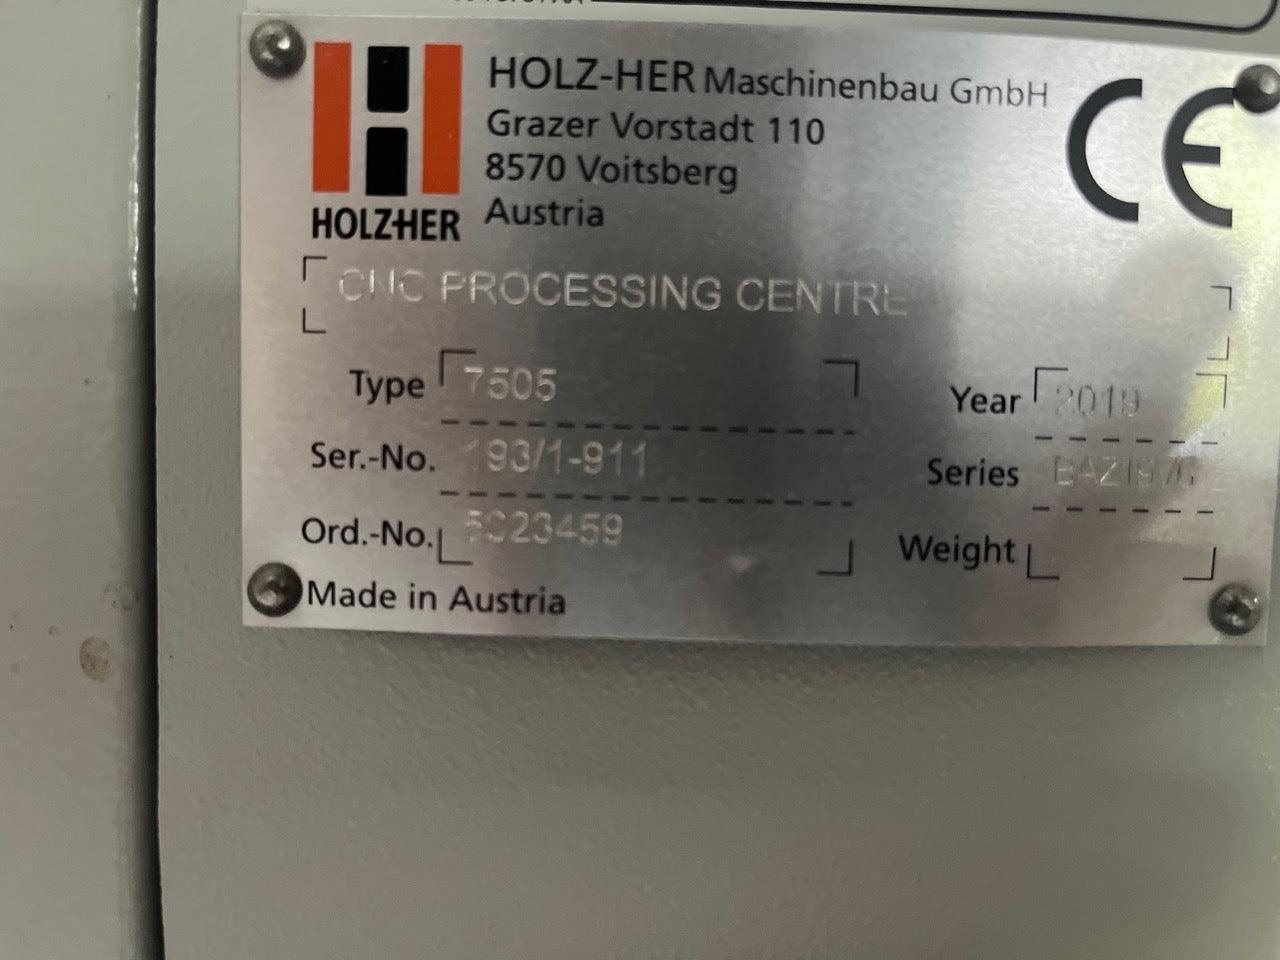 2019 HolzHer Dynestic 7505 12.5 Push CNC Machining Center – Like New Condition – Located in OHIO